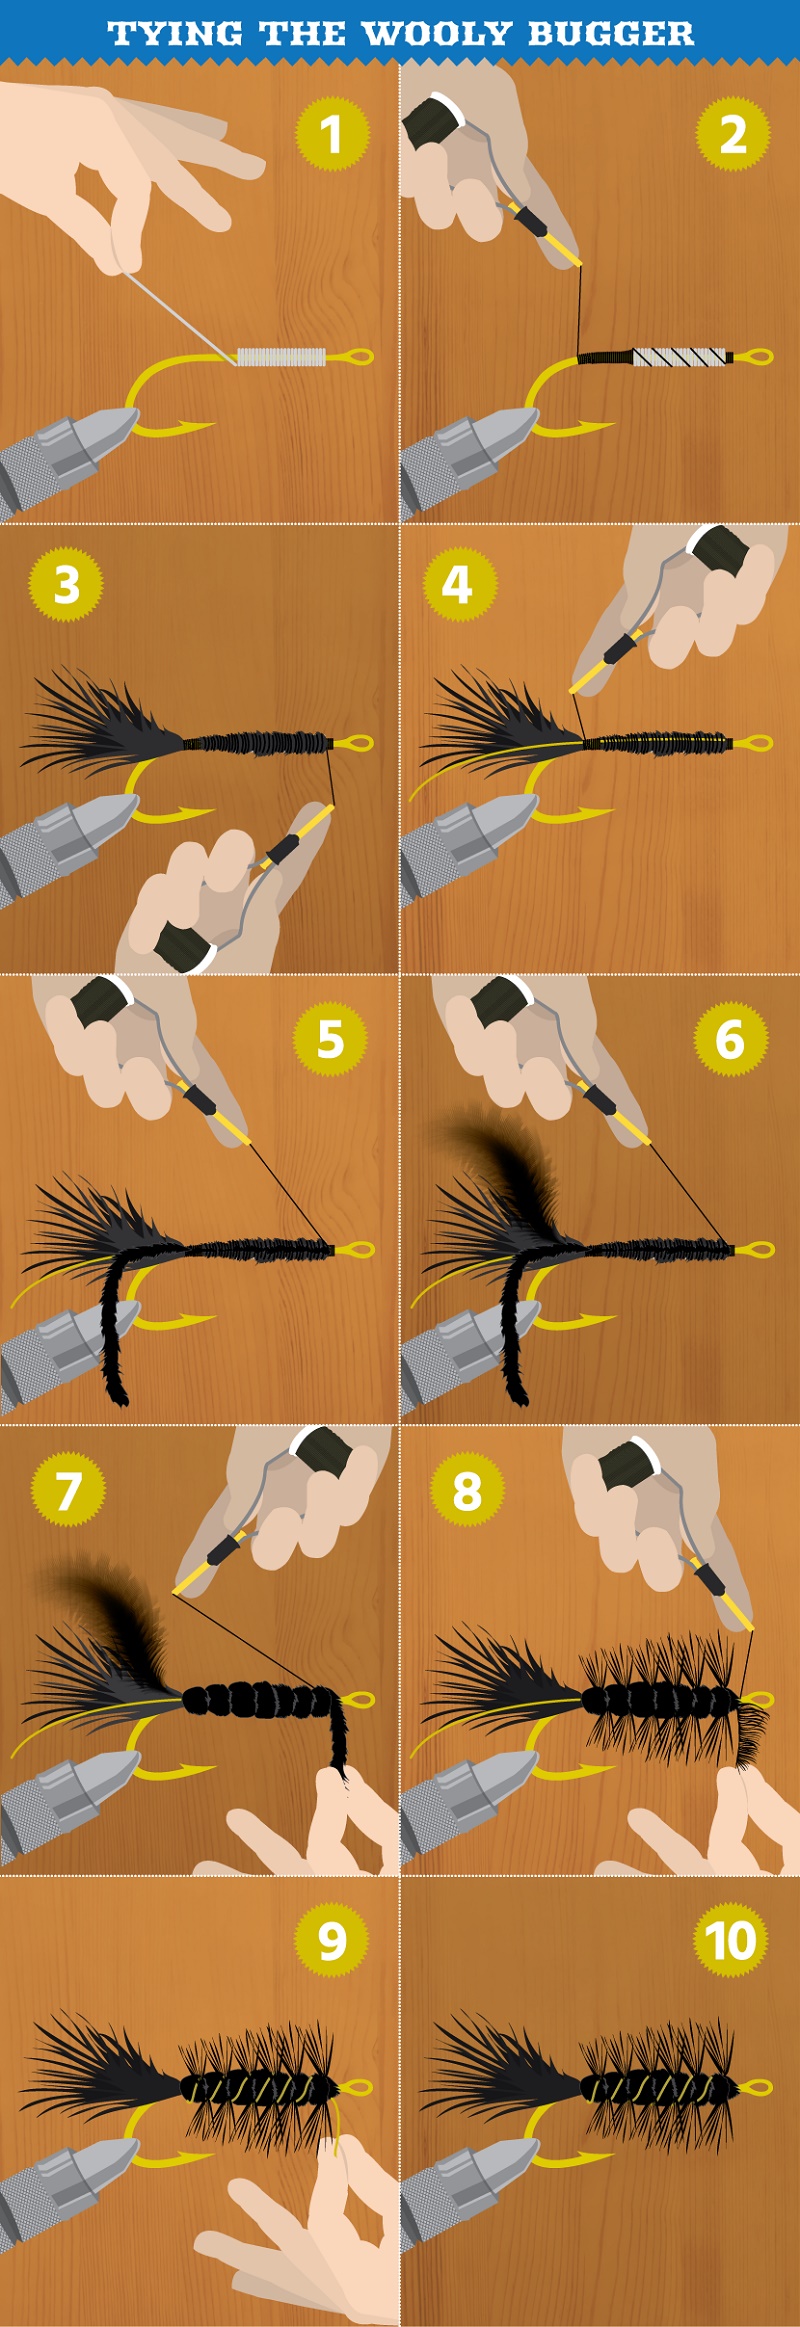 tying-the-wooly-bugger strip web